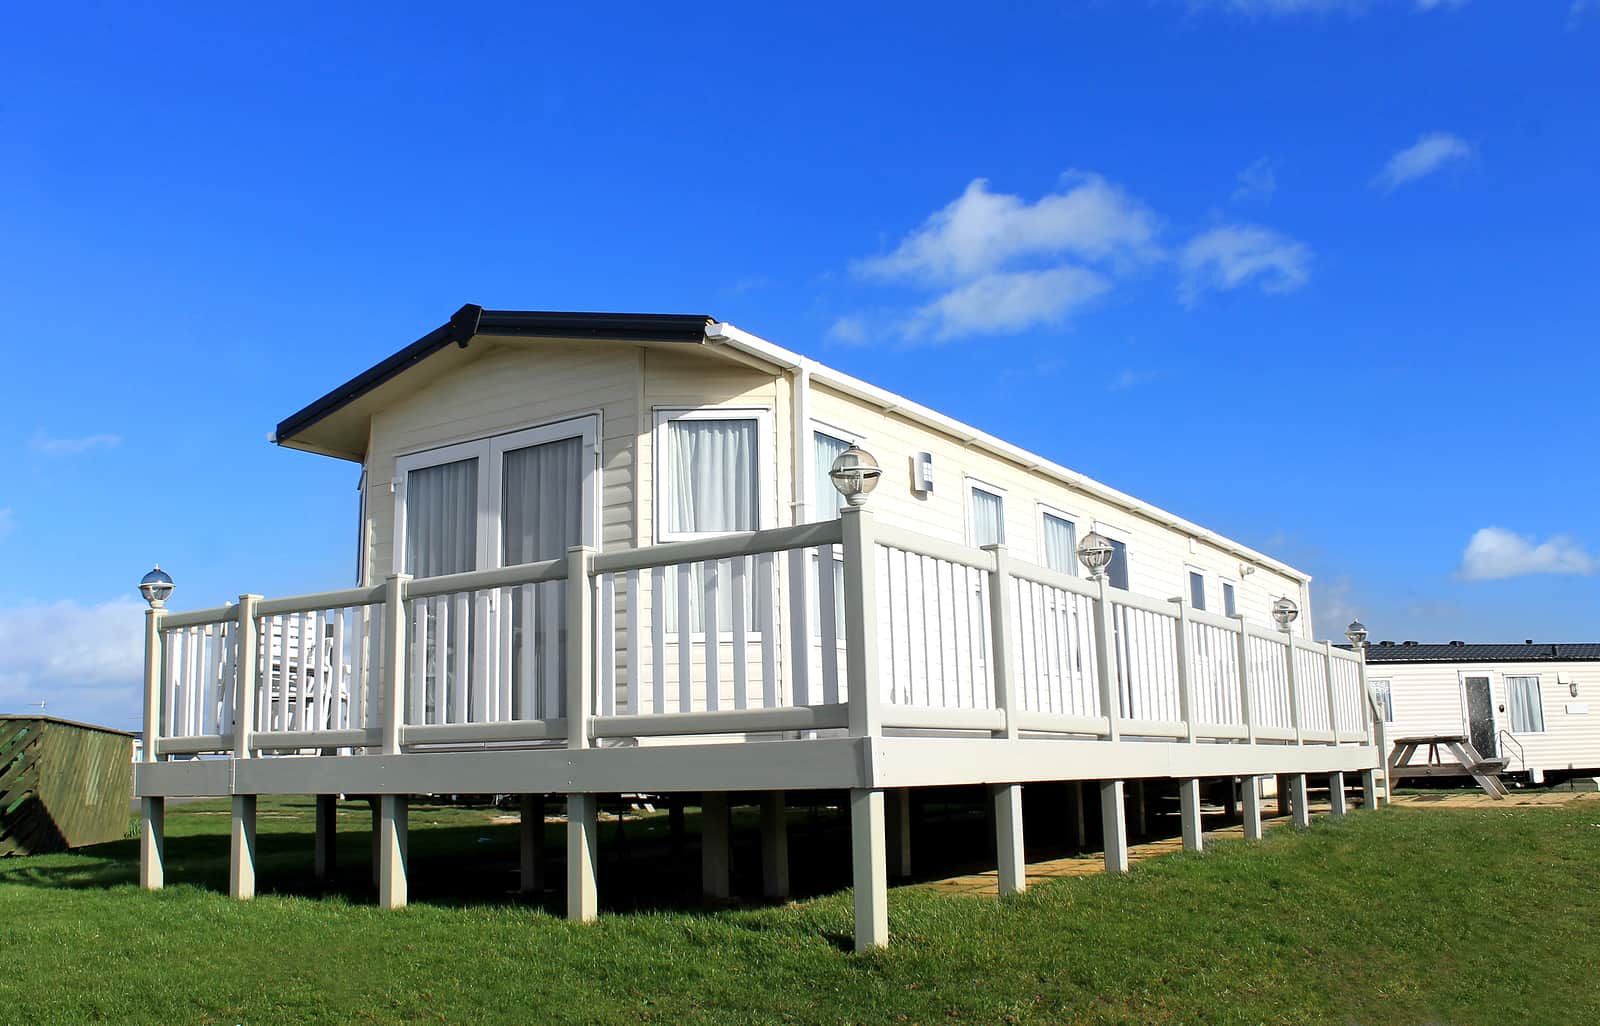 Exterior of static home on caravan site in Filey, England.